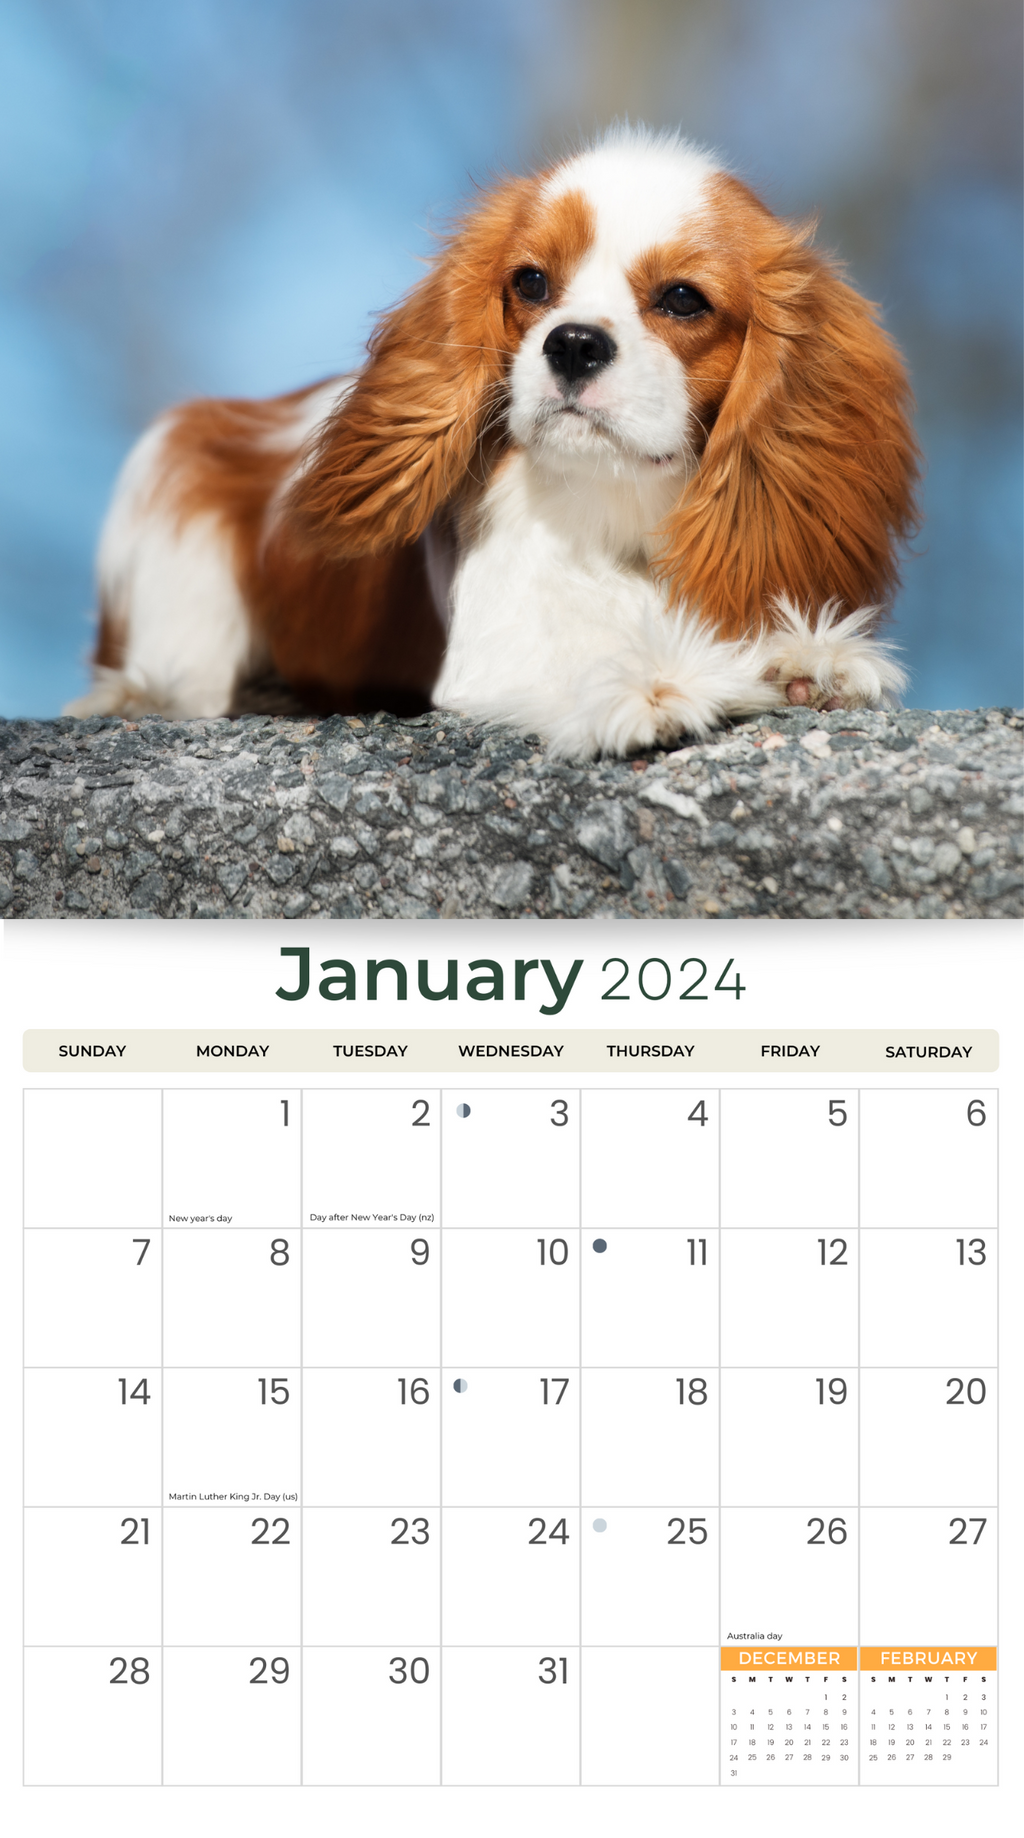 2024 Cavalier King Charles Deluxe Wall Calendar Dogs & Puppies